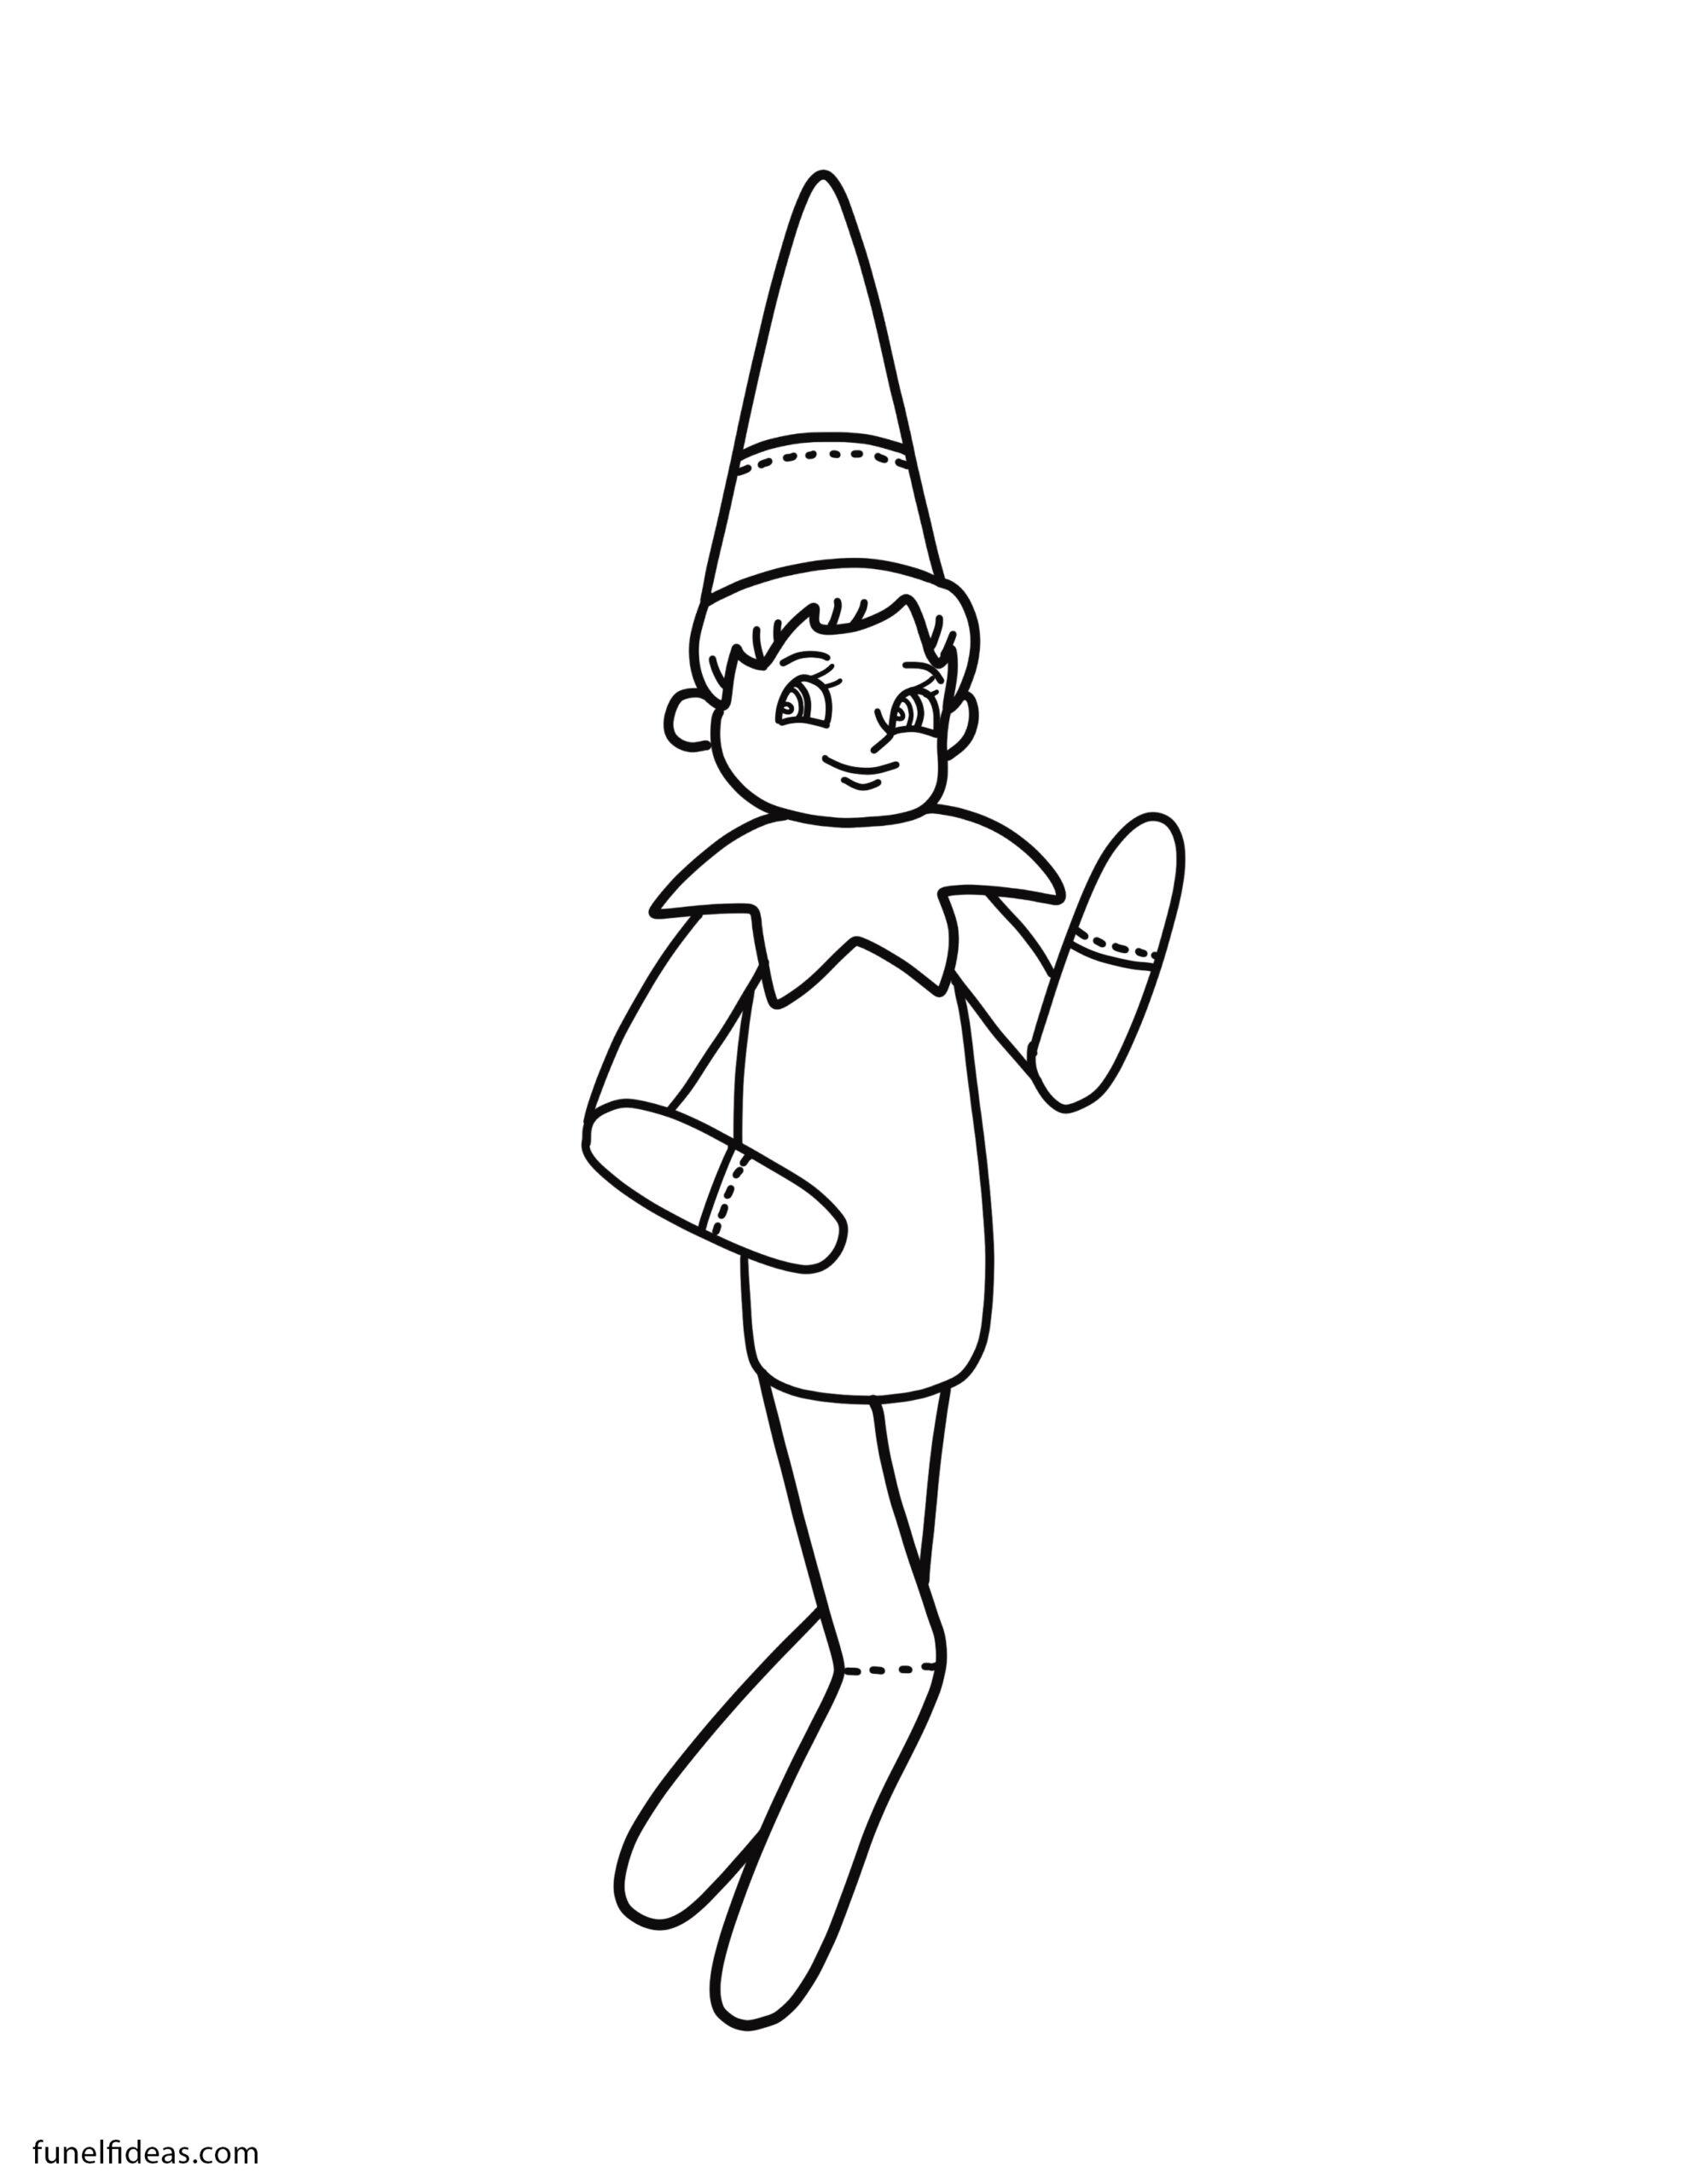 Adorable & FREE Elf On The Shelf Coloring Pages (Printable)!